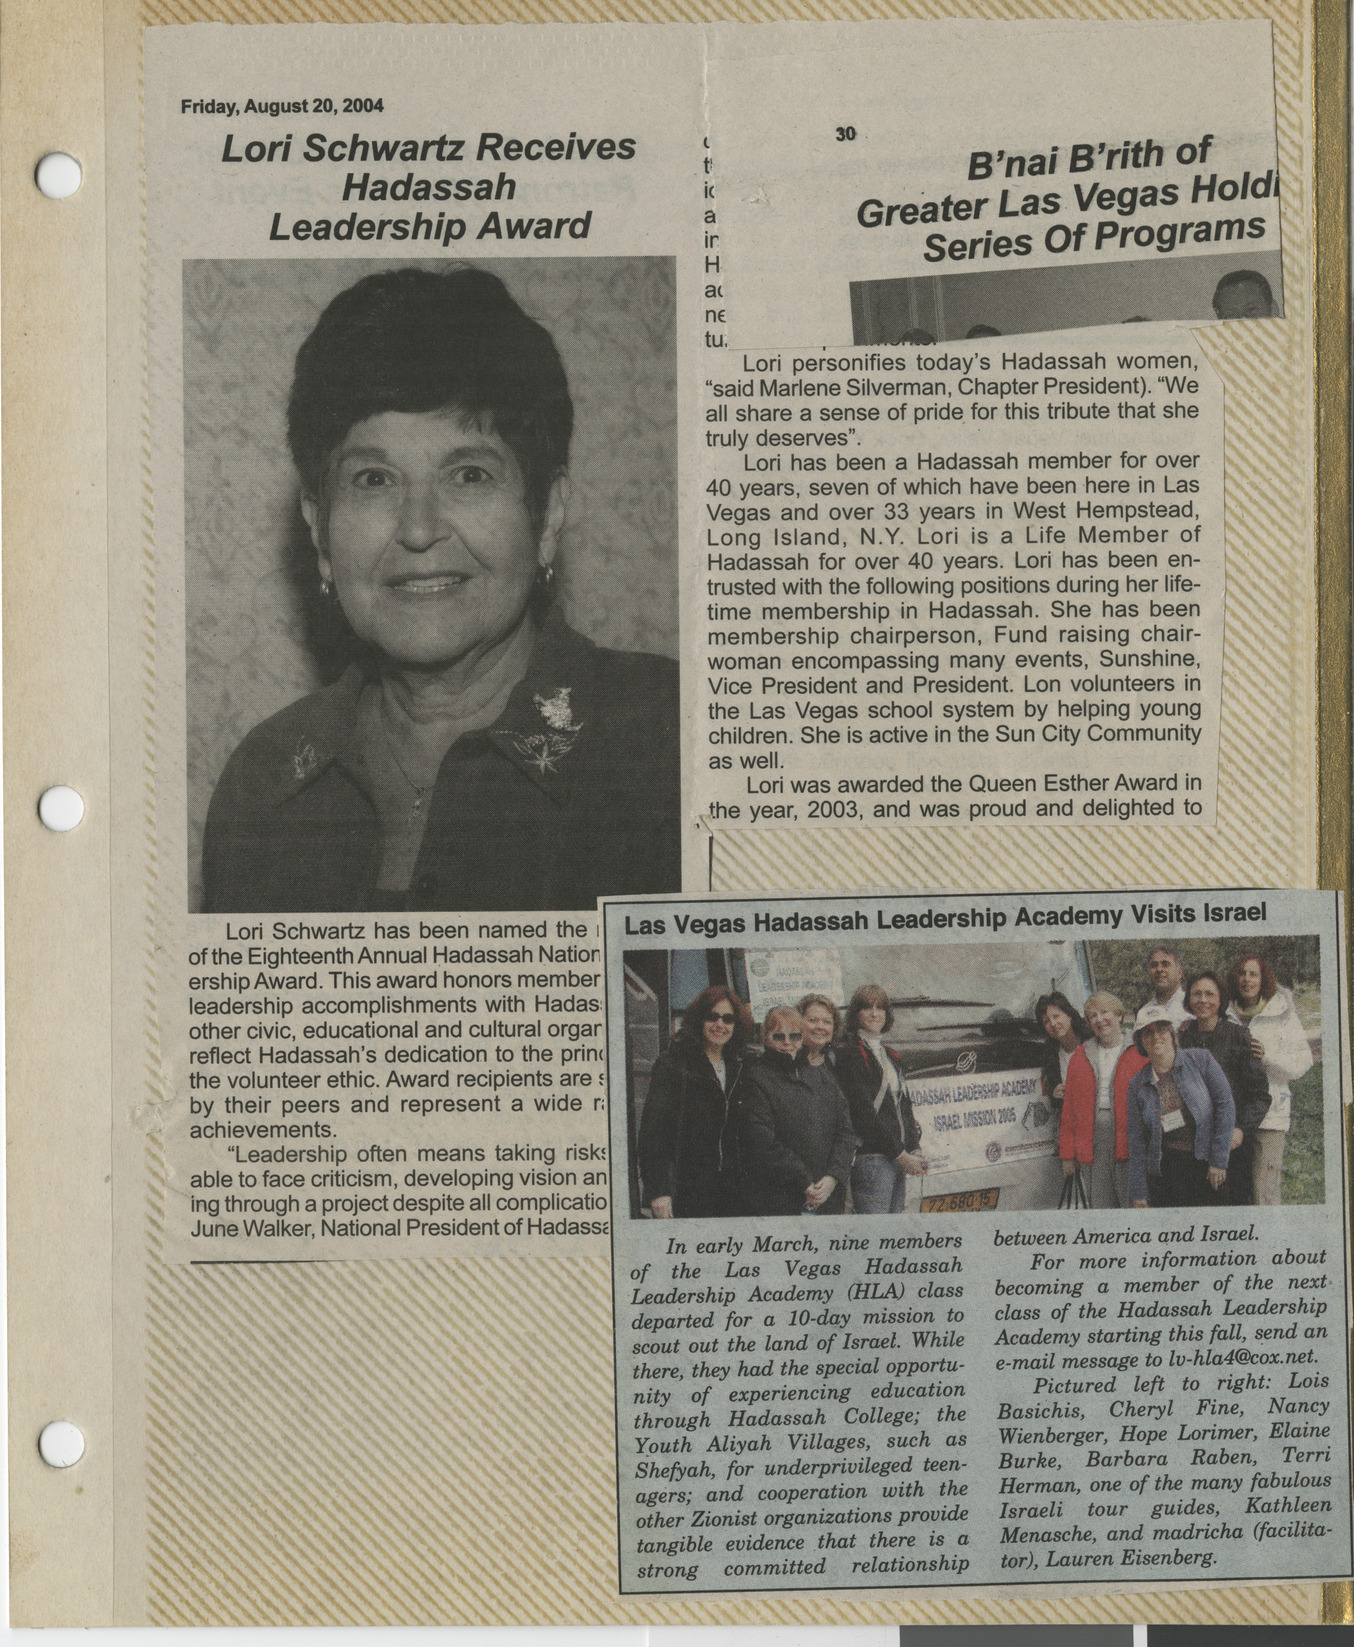 Newspaper clippings for Hadassah events, date unknown